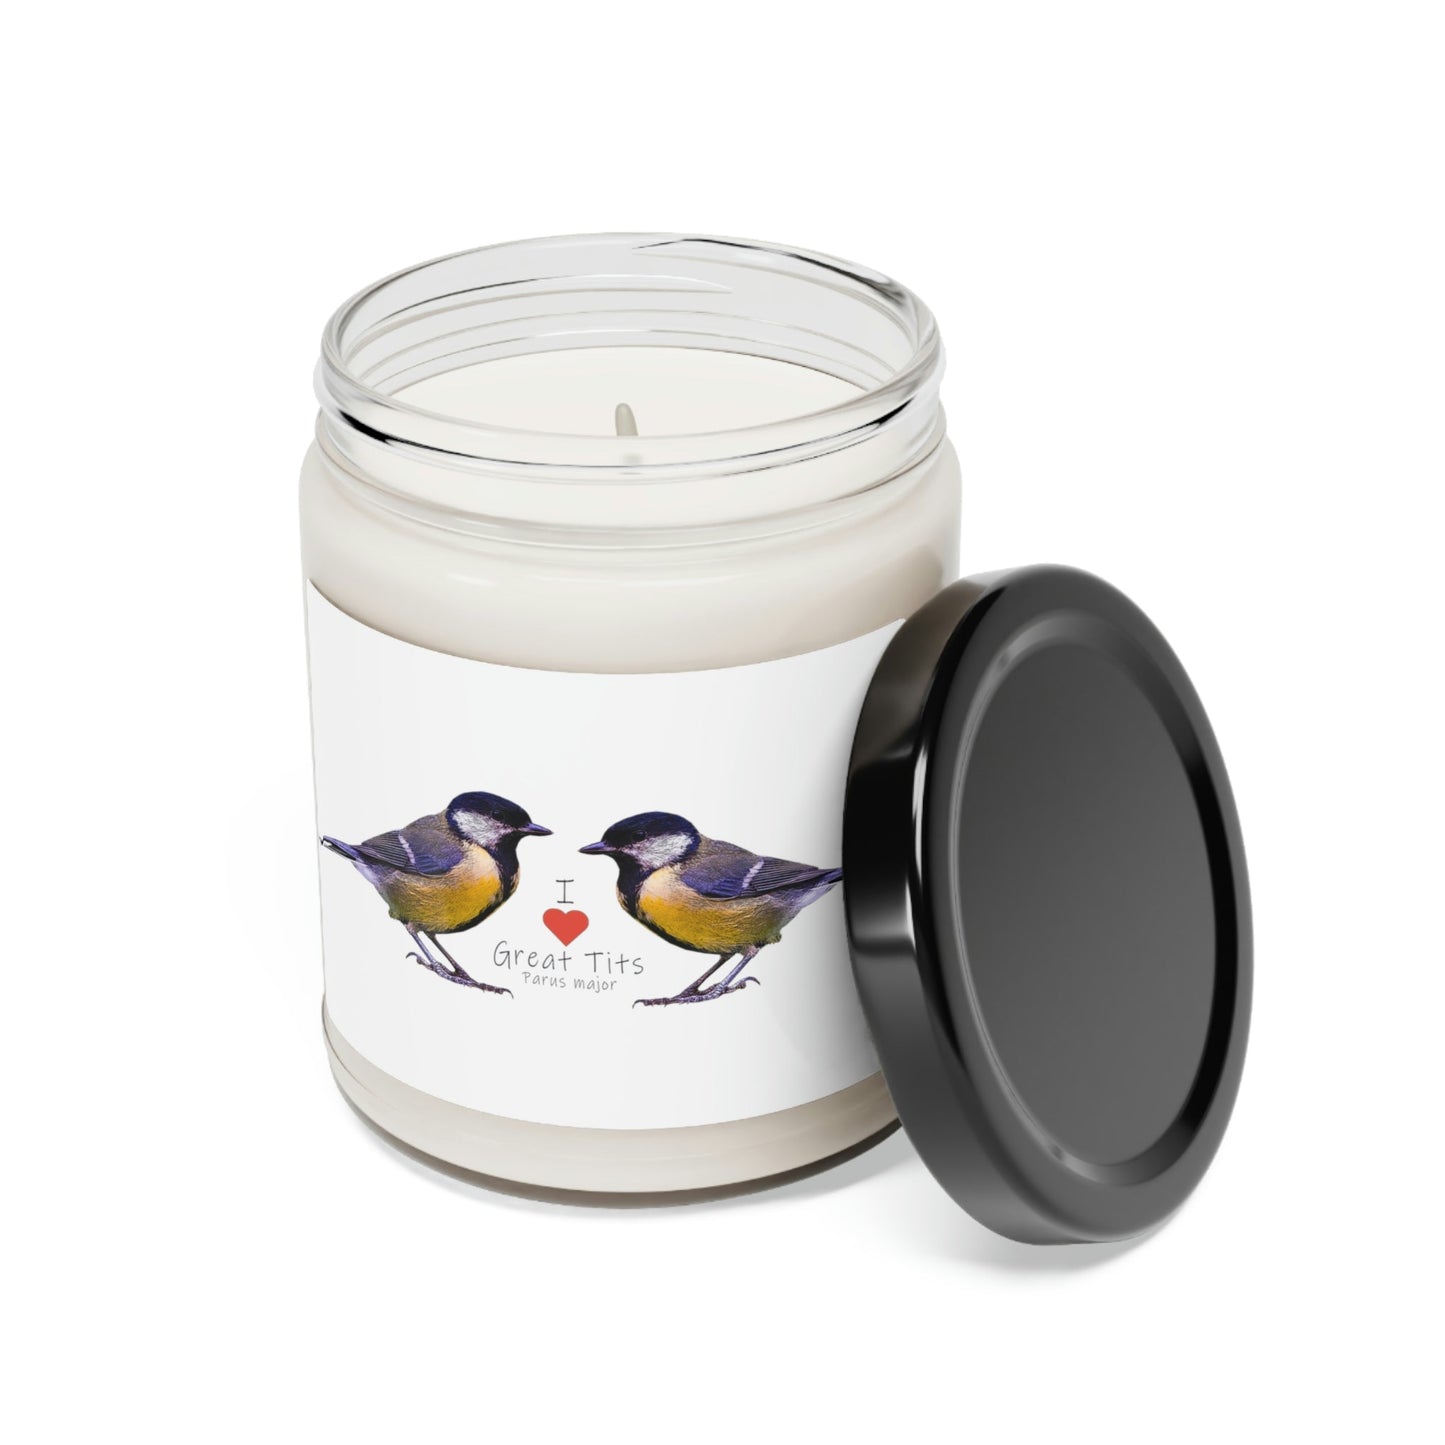 I Love Great Tits Scented Soy Candle - 9oz